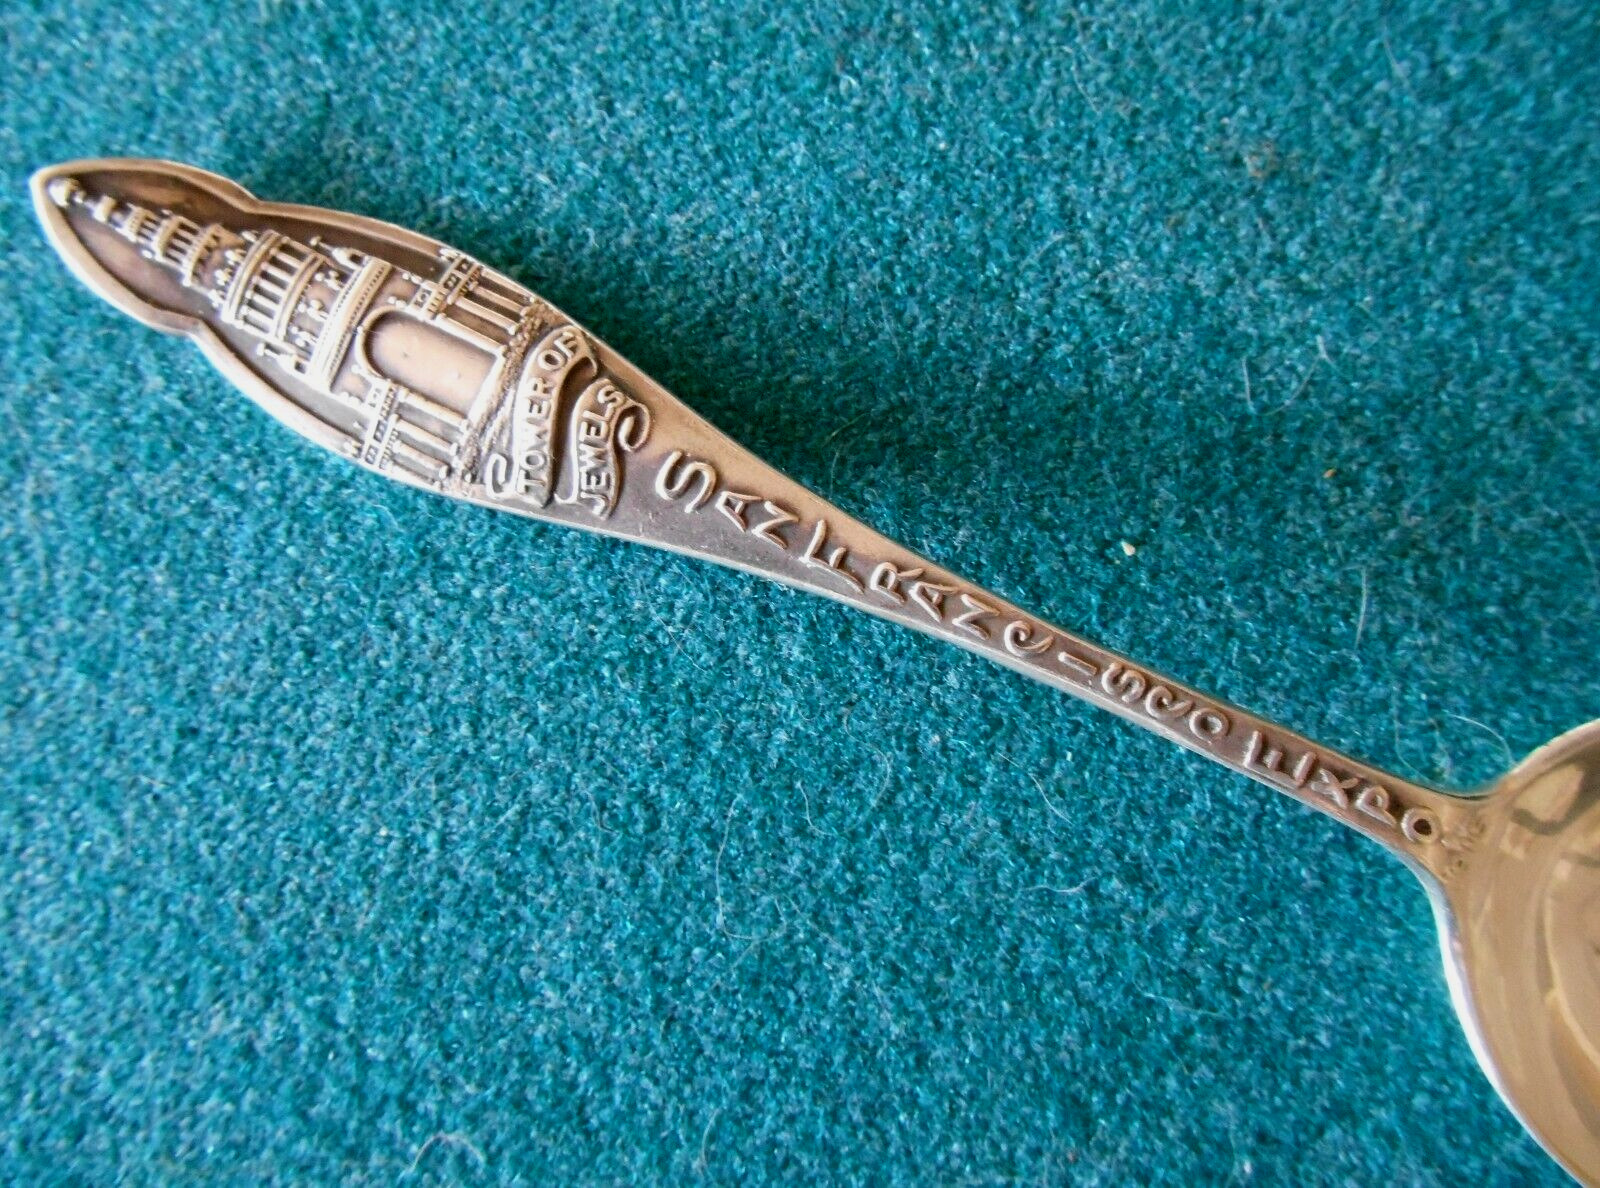 1915 San Francisco Exposition Tower of Jewels Sterling Silver Souvenir Spoon